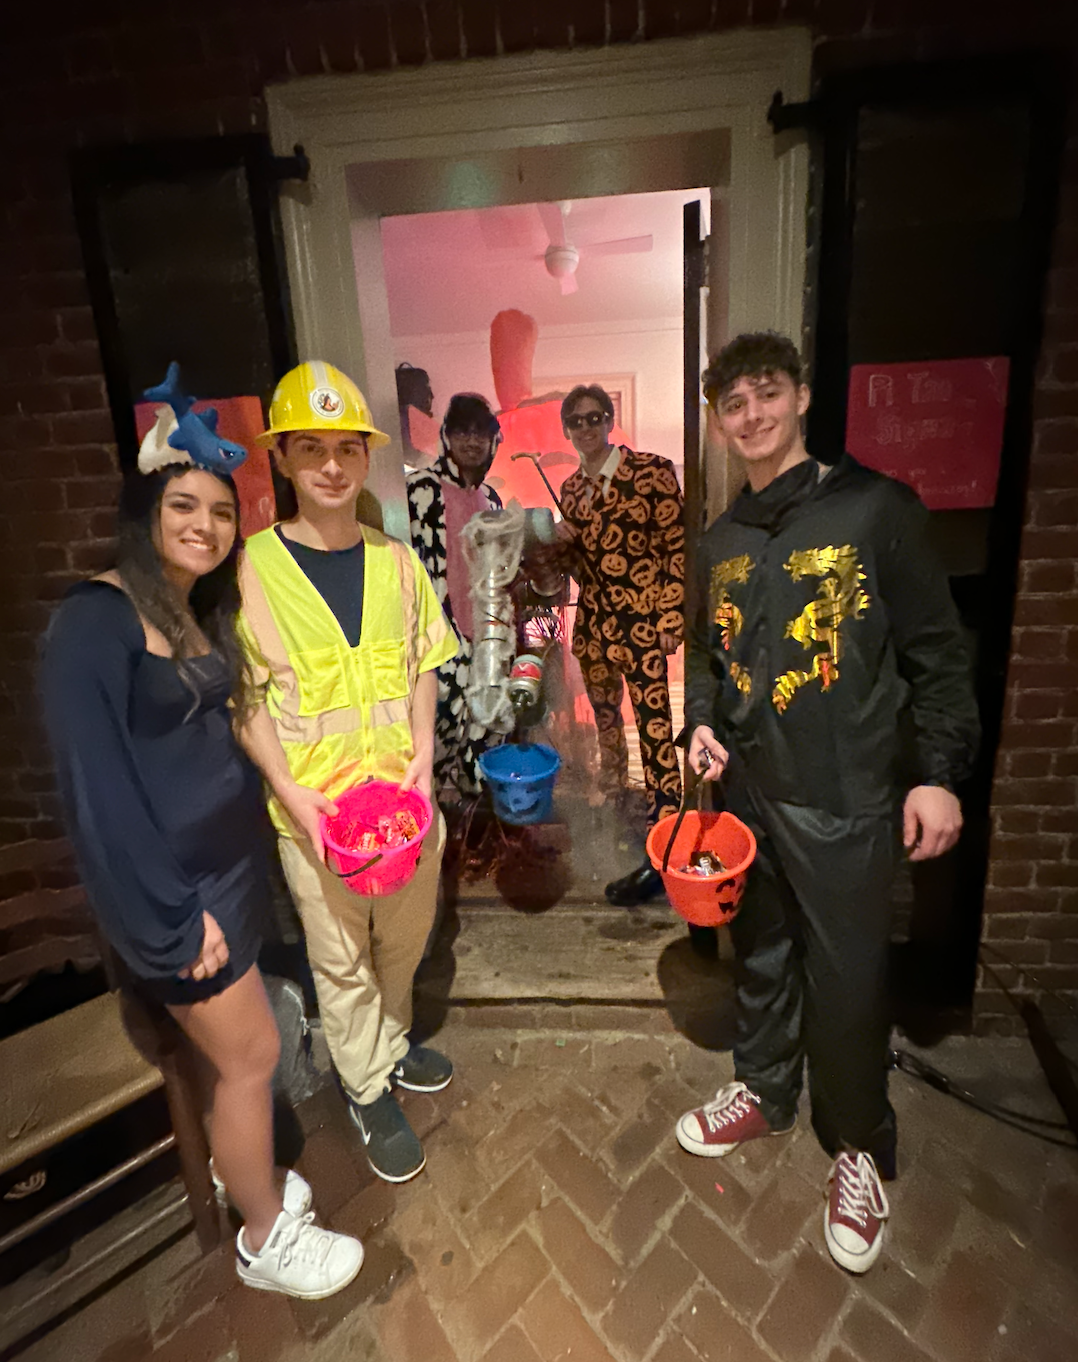 Pictured from left to right: Kristen, Nicholas, Taha, Dylan, & Owen alongside the trick or treating robot.